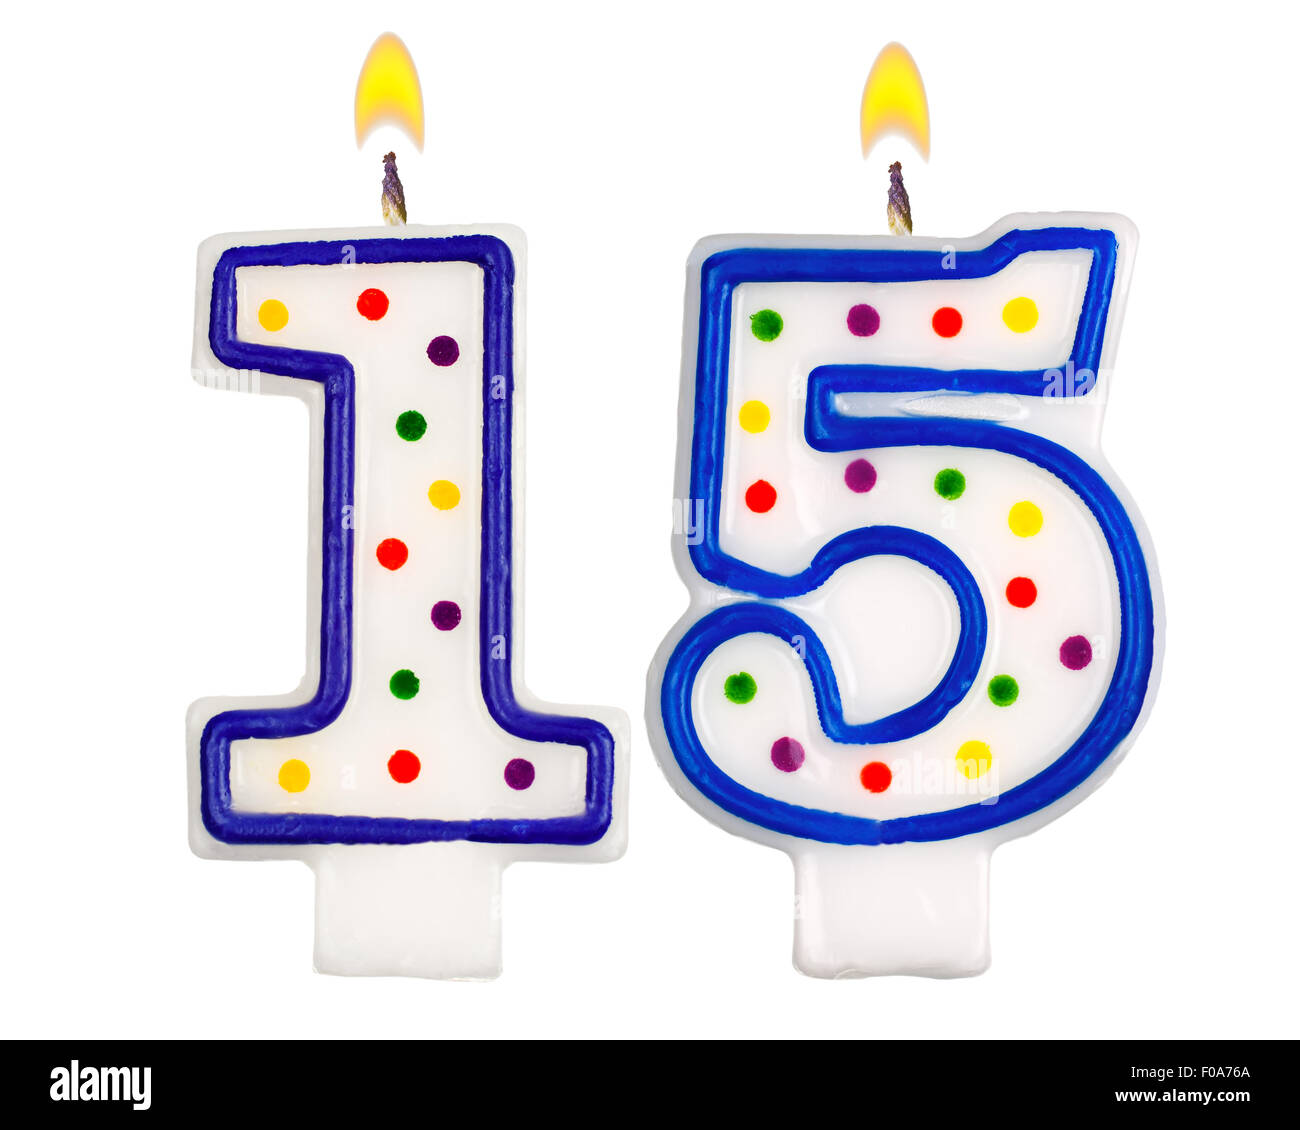 Birthday candles number fifteenisolated on white background Stock Photo